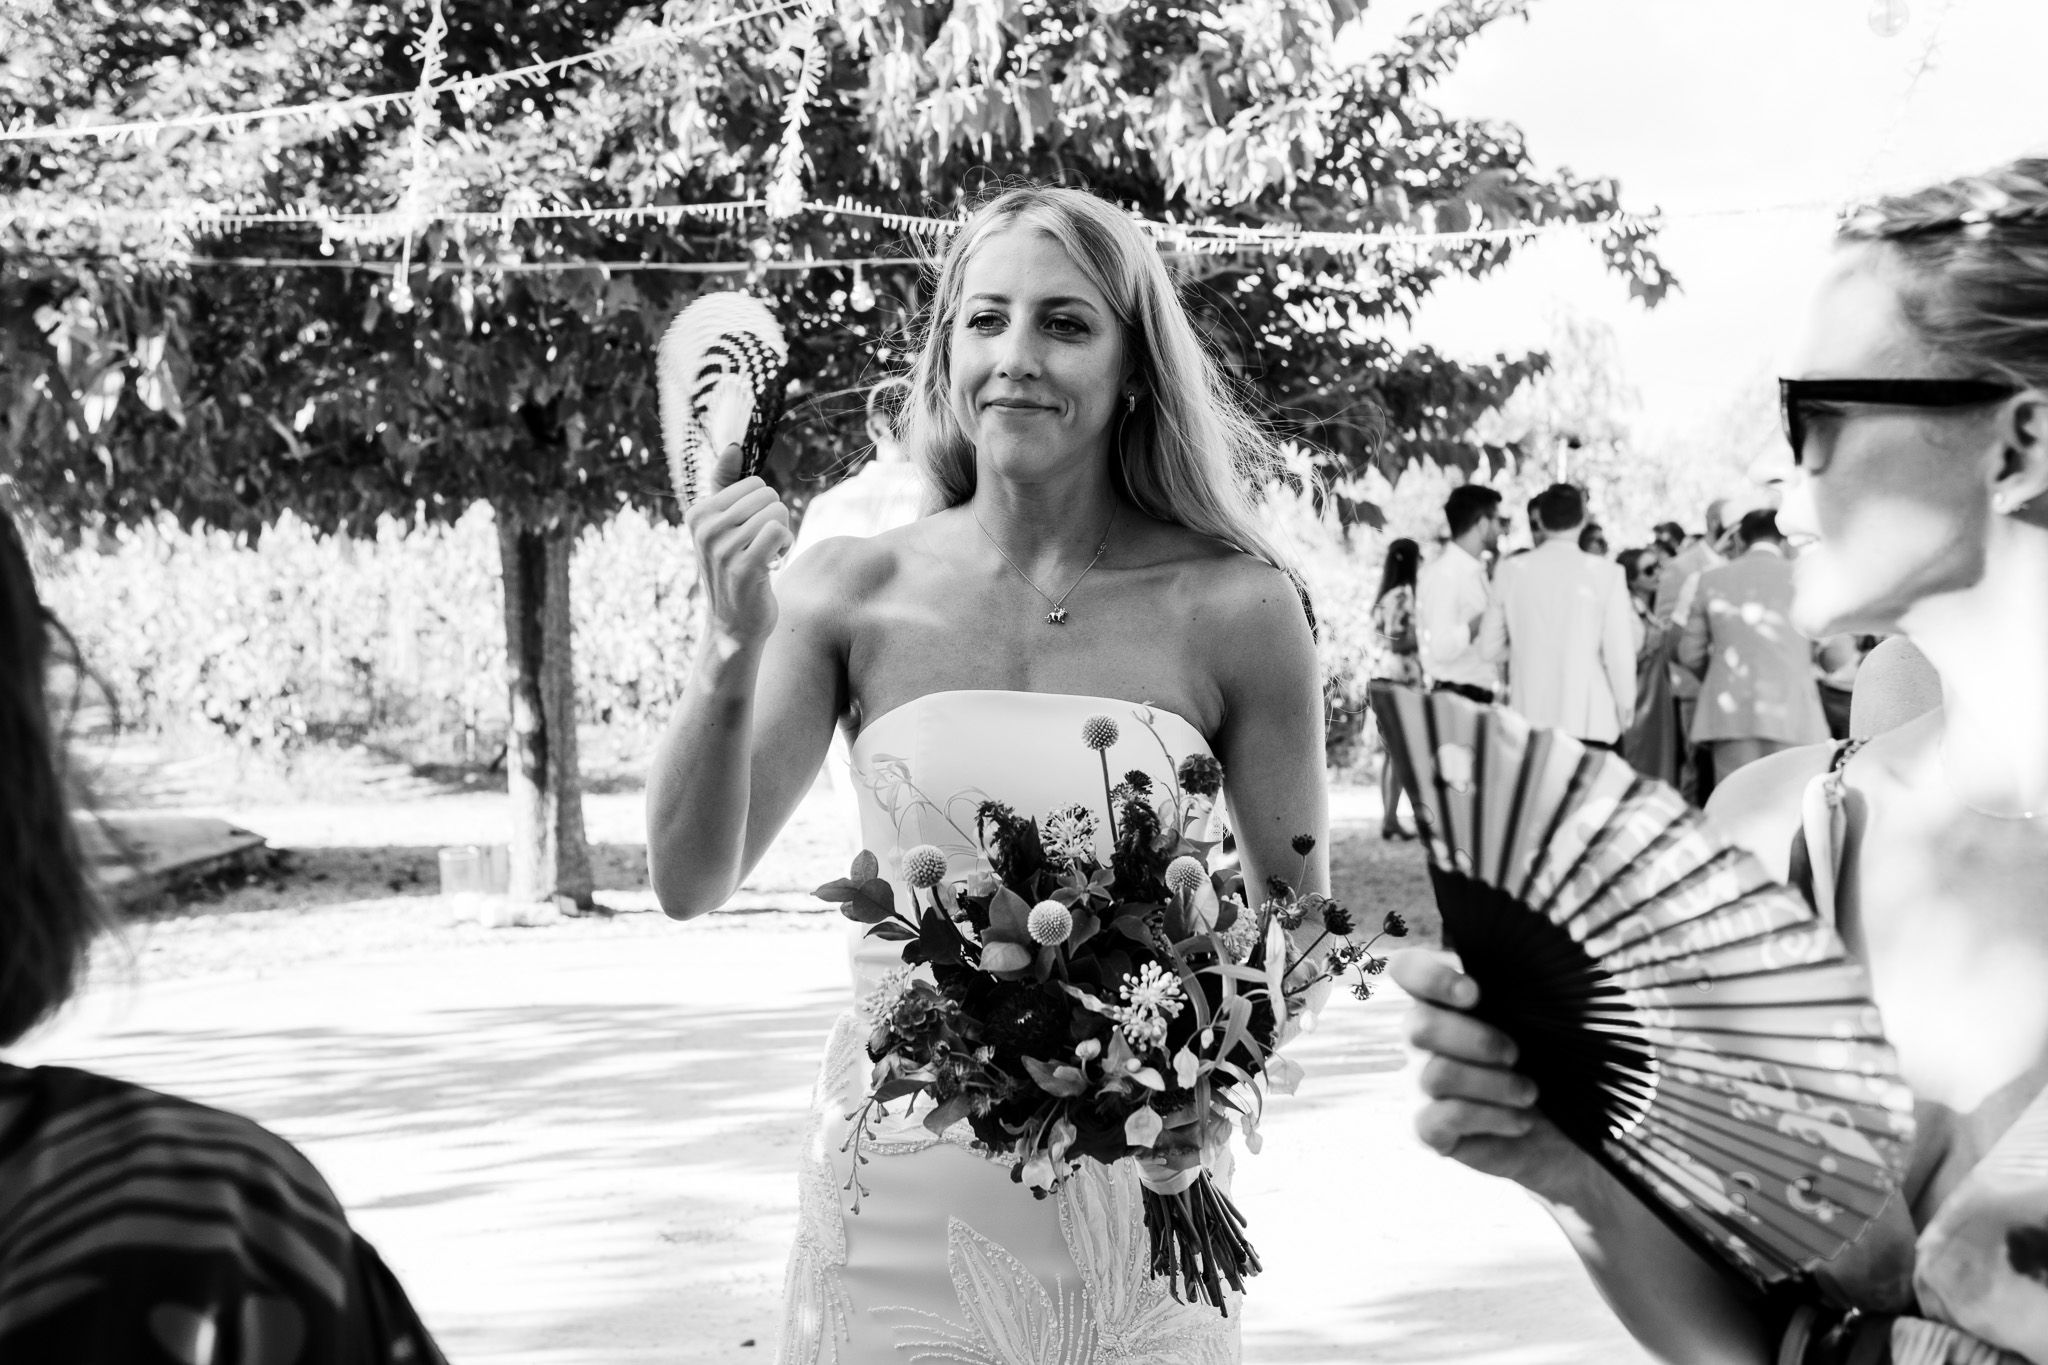 The bride smiles and fans herself at a very hot destination wedding in Corfu